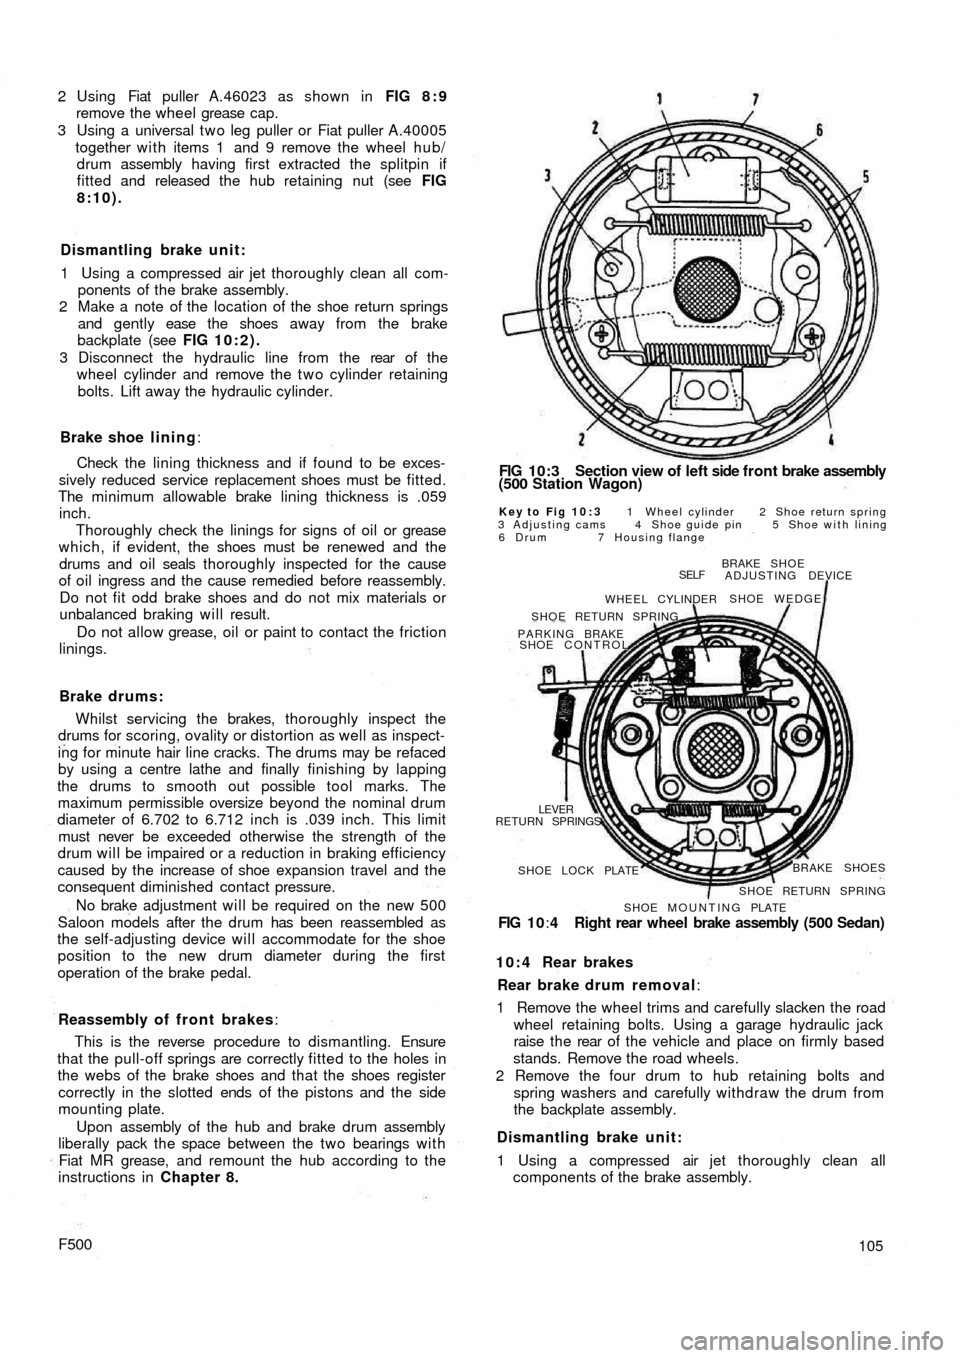 FIAT 500 1960 1.G Workshop Manual 2 Using  Fiat puller A.46023 as shown in FIG 8 : 9
remove the wheel grease cap.
3 Using a universal t w o leg puller or Fiat puller A.40005
together w i t h items 1  and 9 remove the wheel hub/
drum a